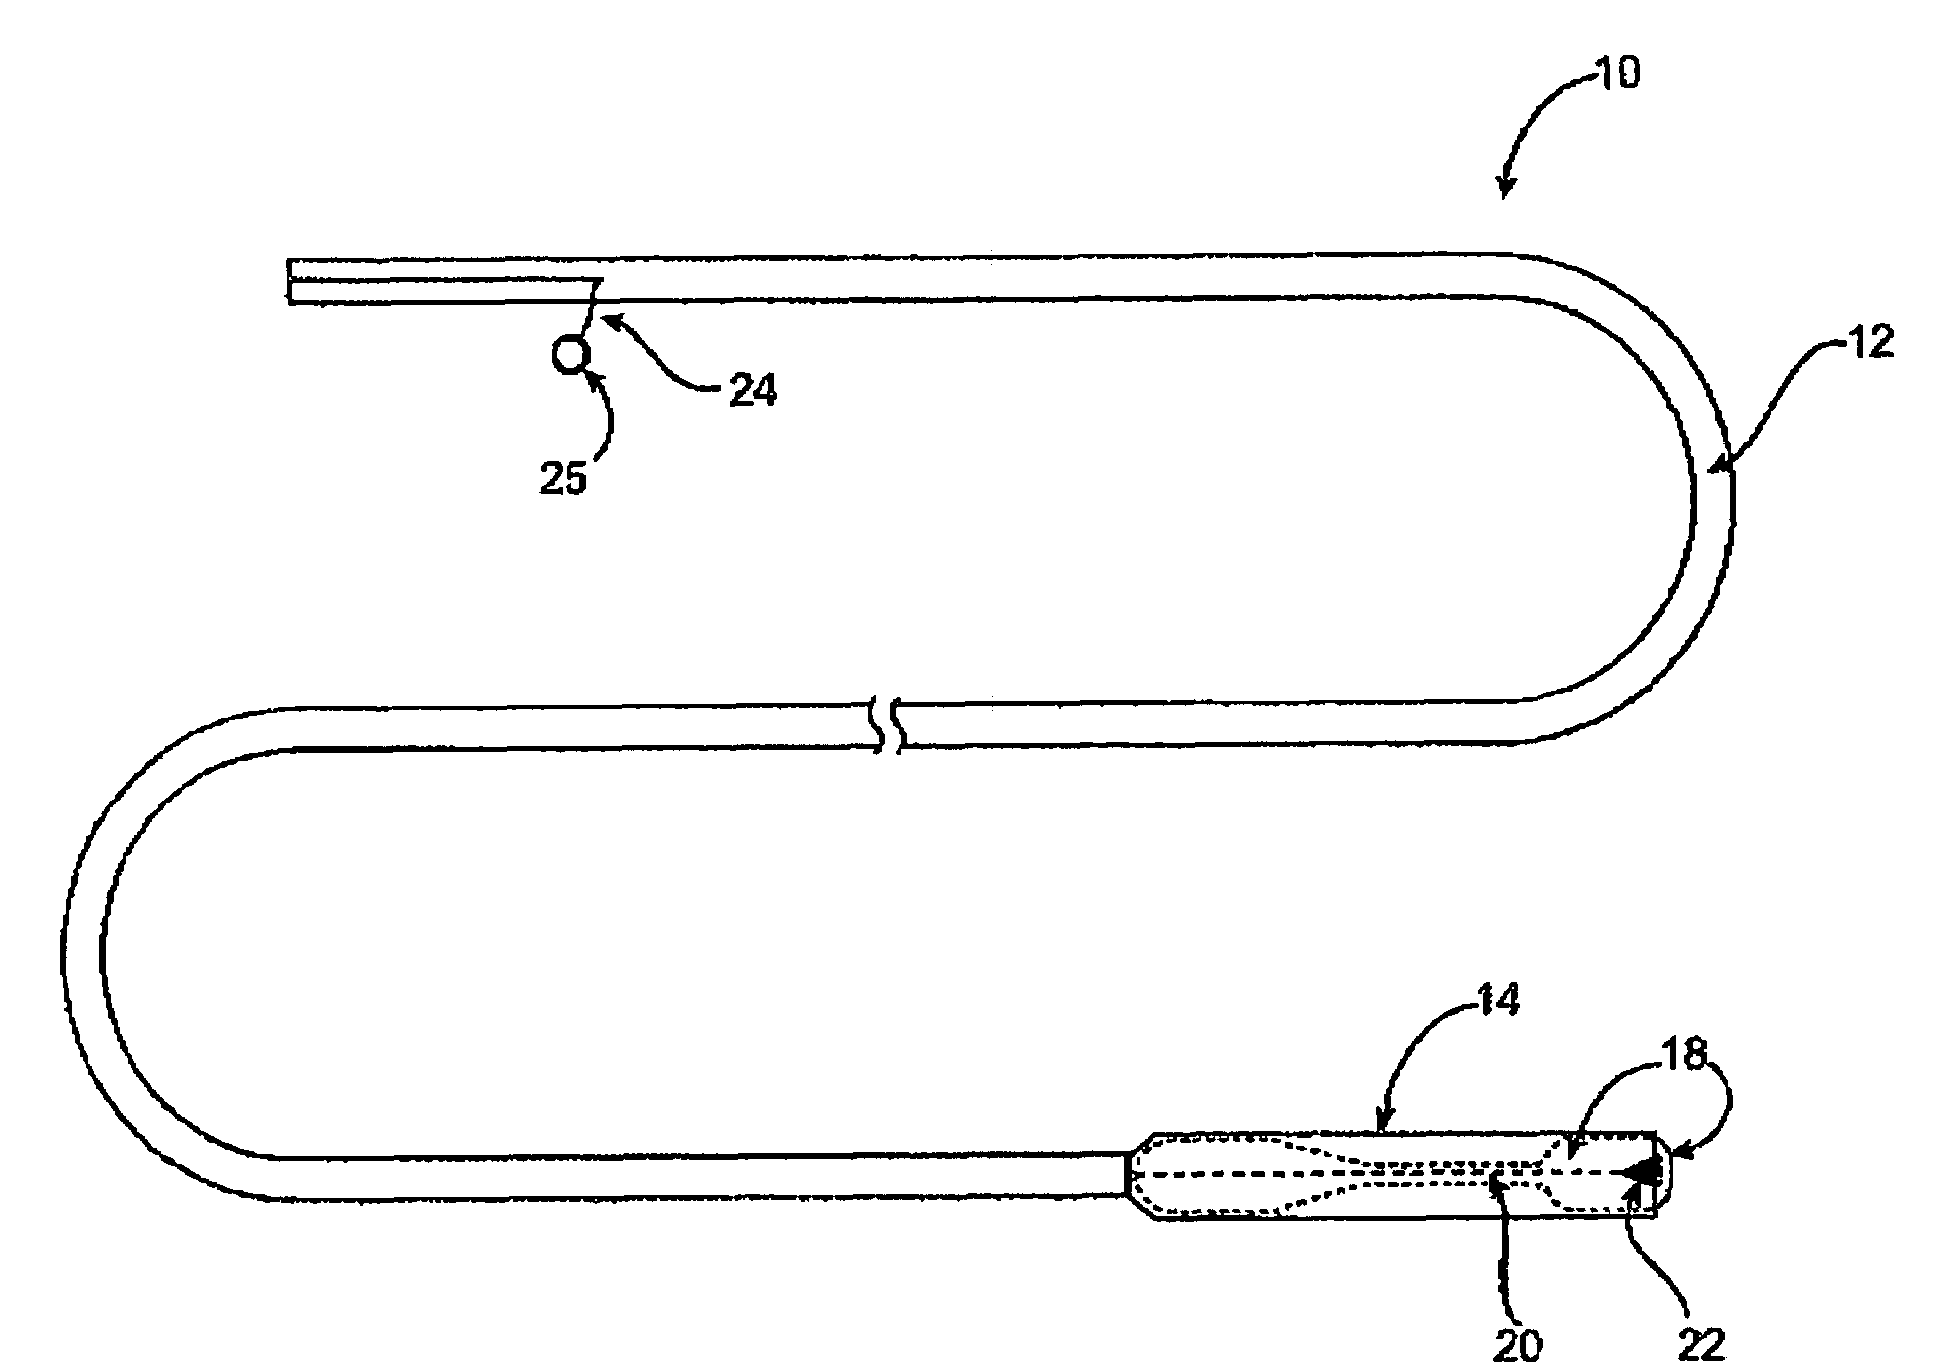 Medical device delivery catheter